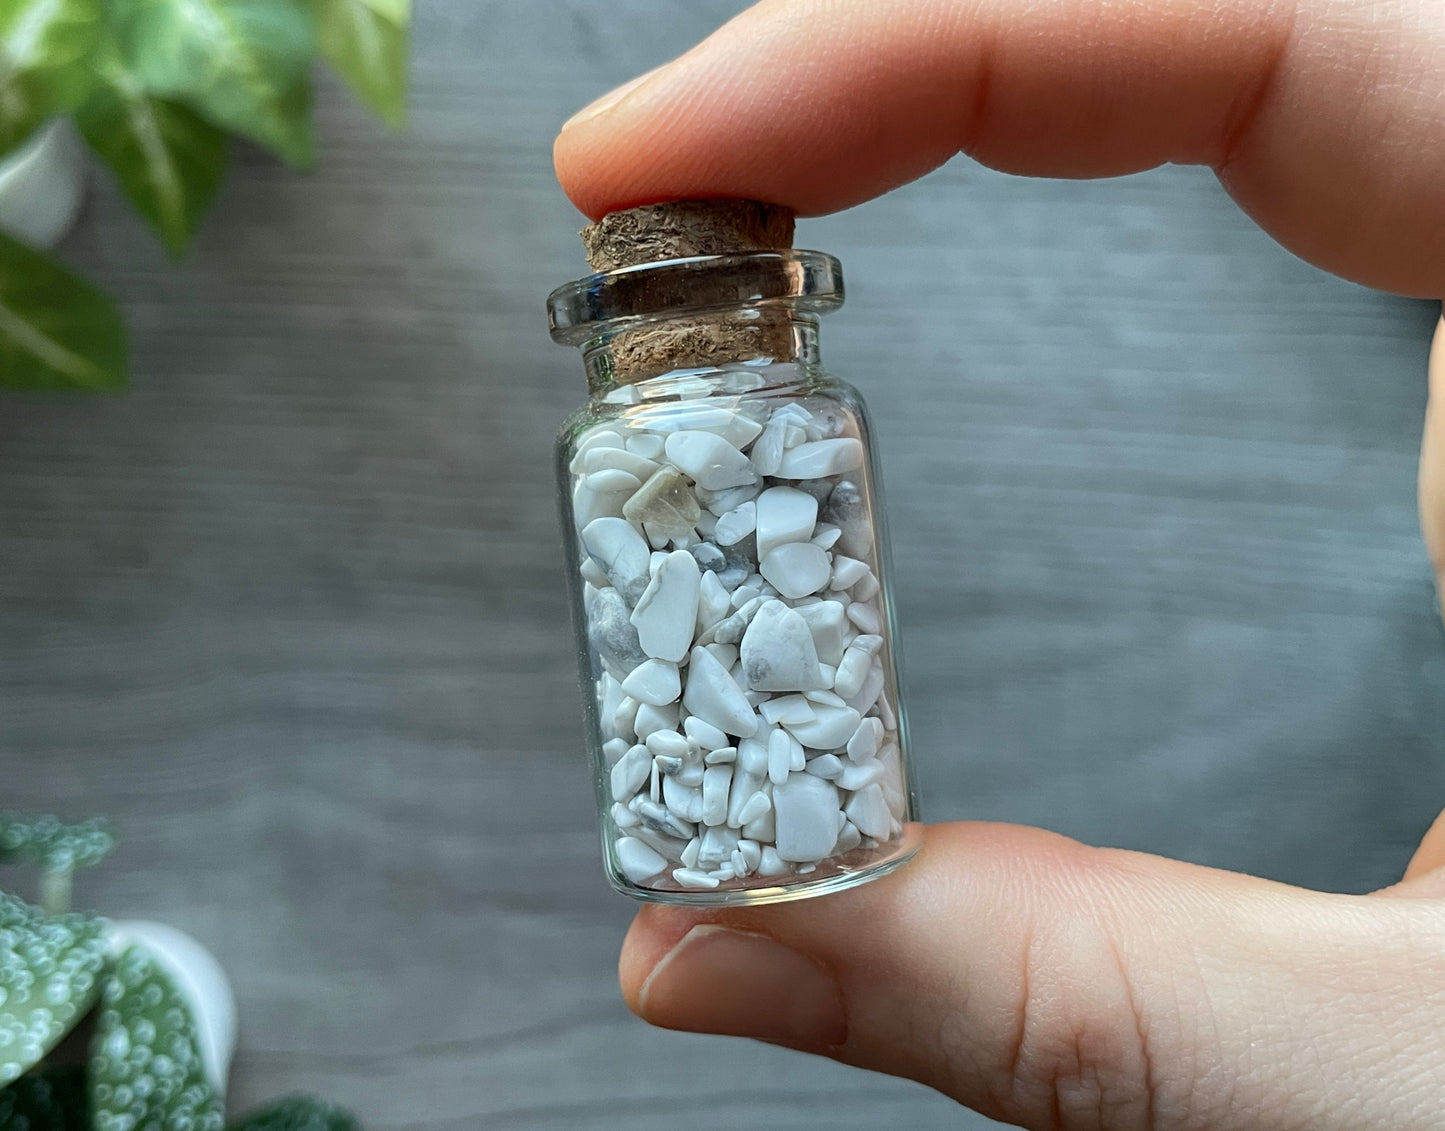 Pictured is a small glass vial with a cork stopper. Inside the jar are howlite chips.